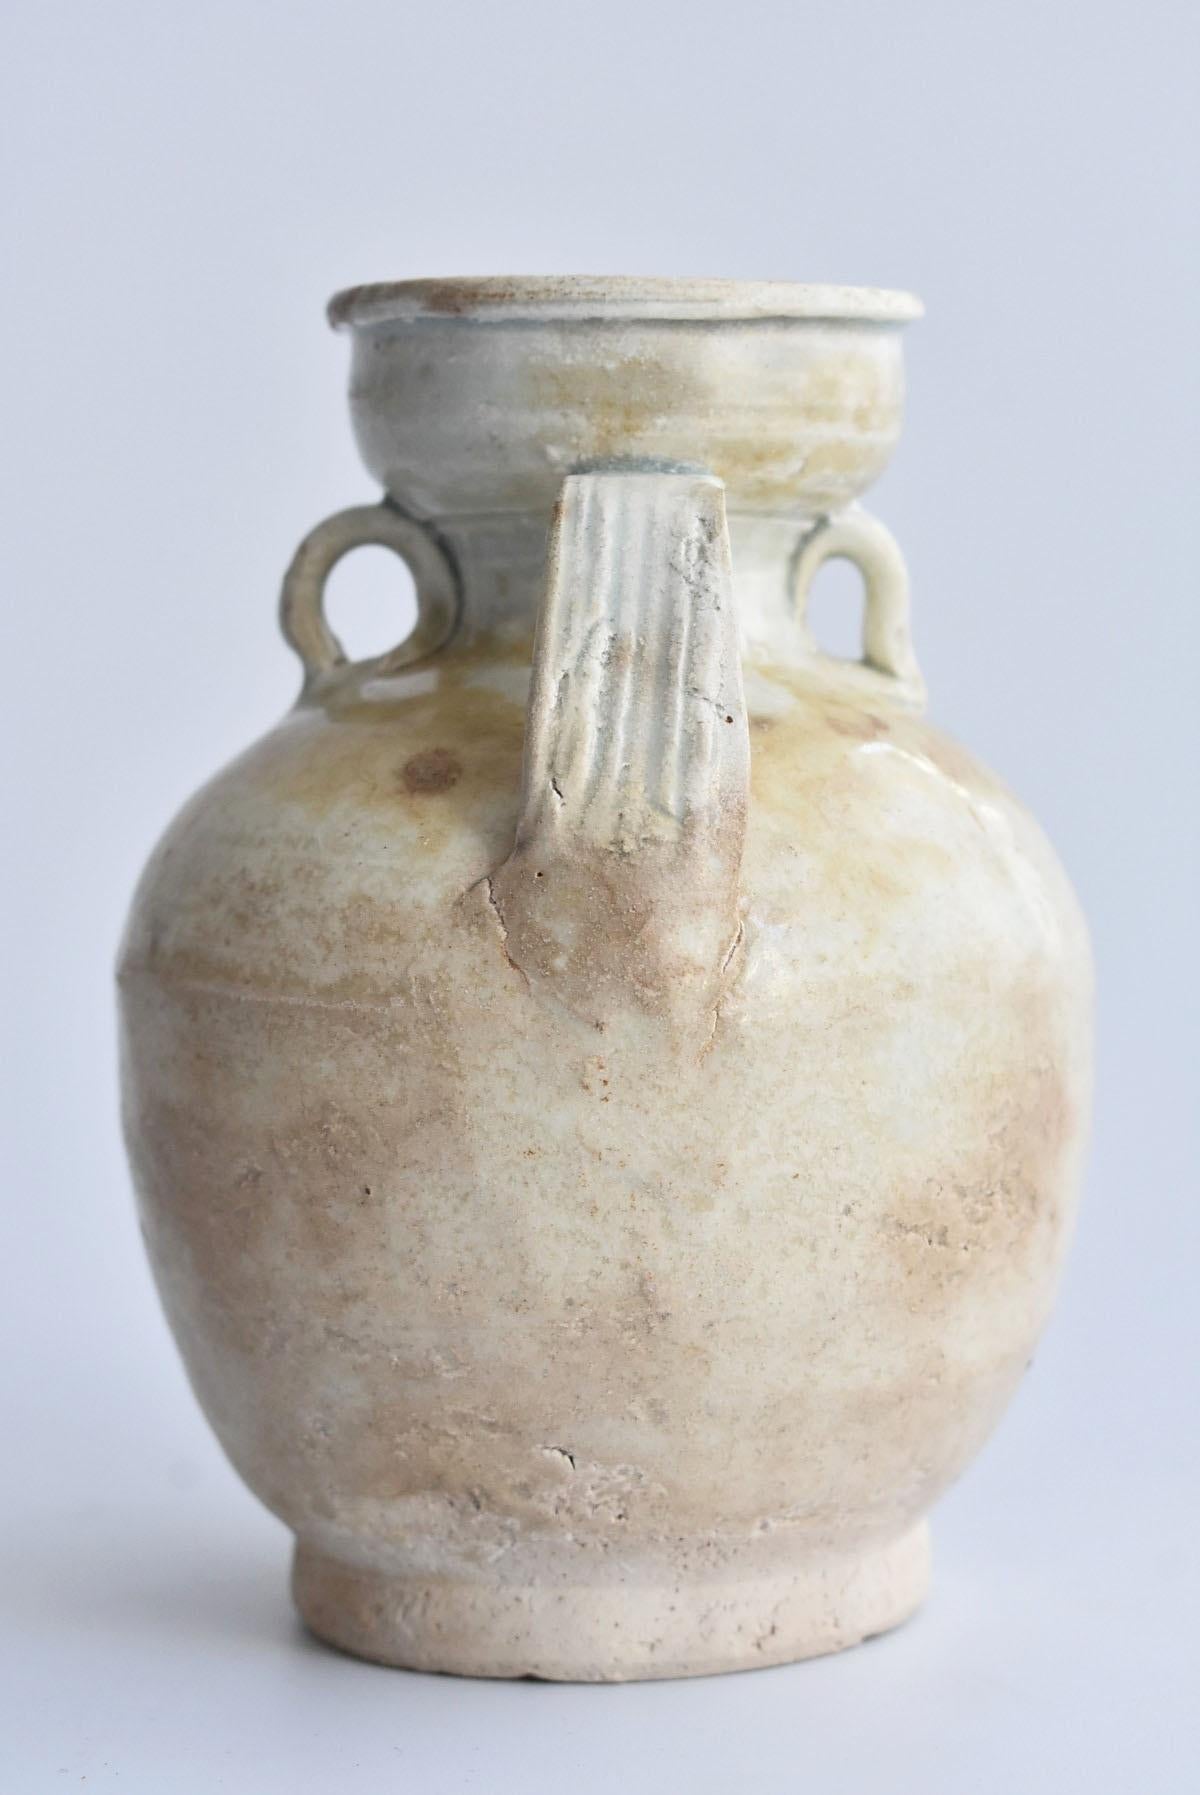 This is a jar burned during the Song dynasty (960to1279) in China.
Products baked with white or pale glaze are characteristic of this era.
It can be said to be a representative color of this era.

It is a very noble and beautiful color.
Since